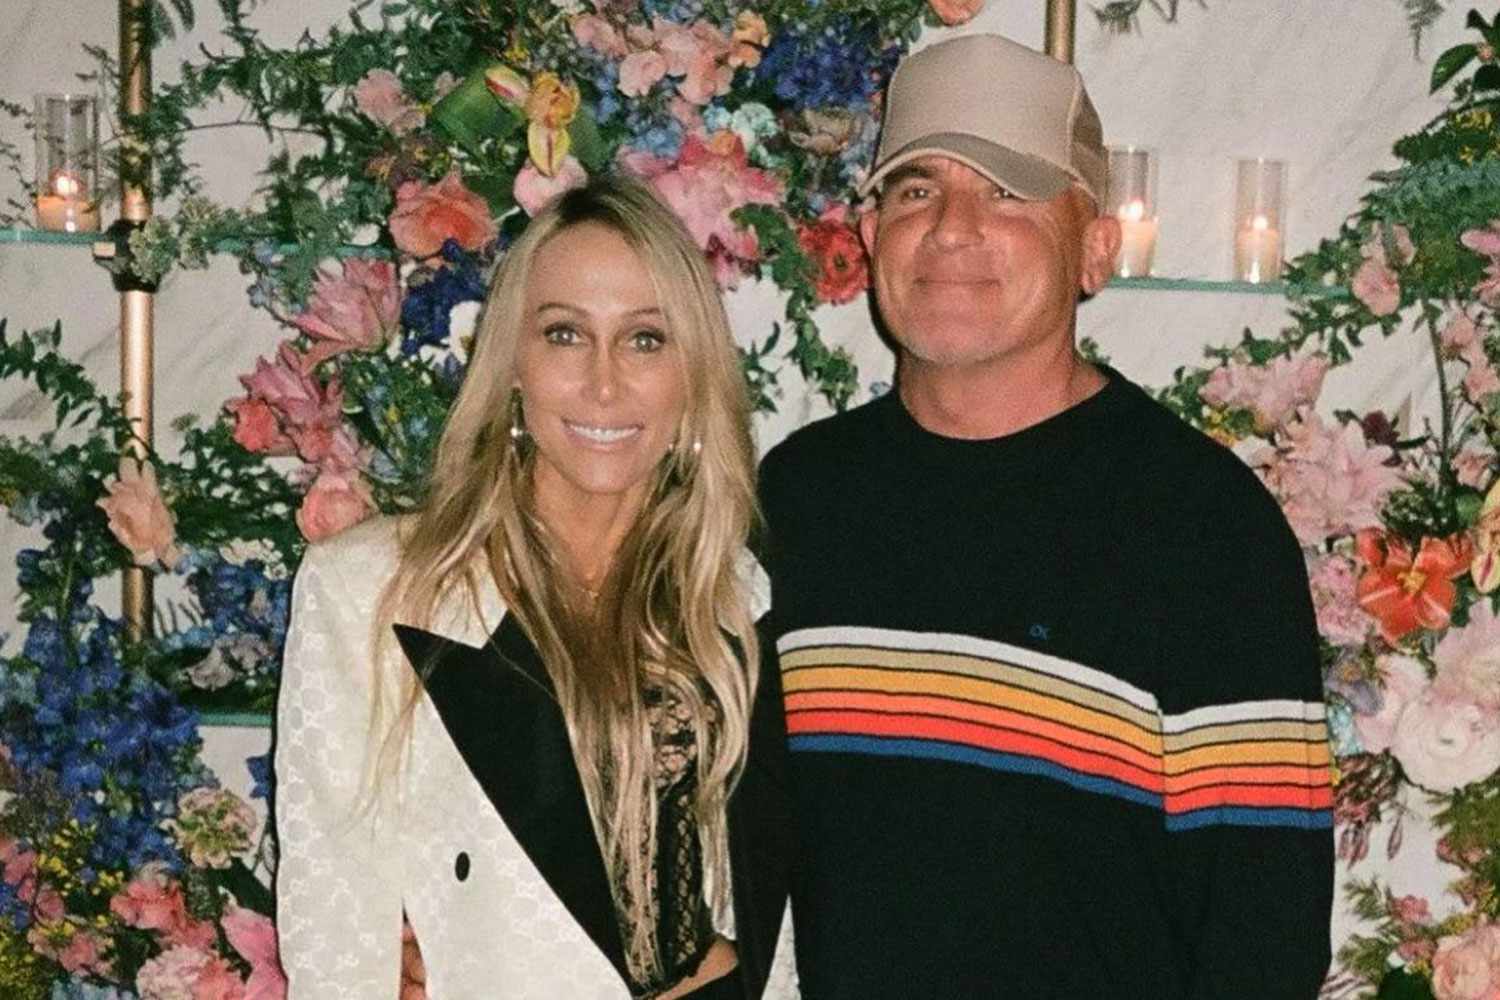 Who Is Tish Cyrus's FiancÃ©? All About 'Prison Break' Star Dominic Purcell